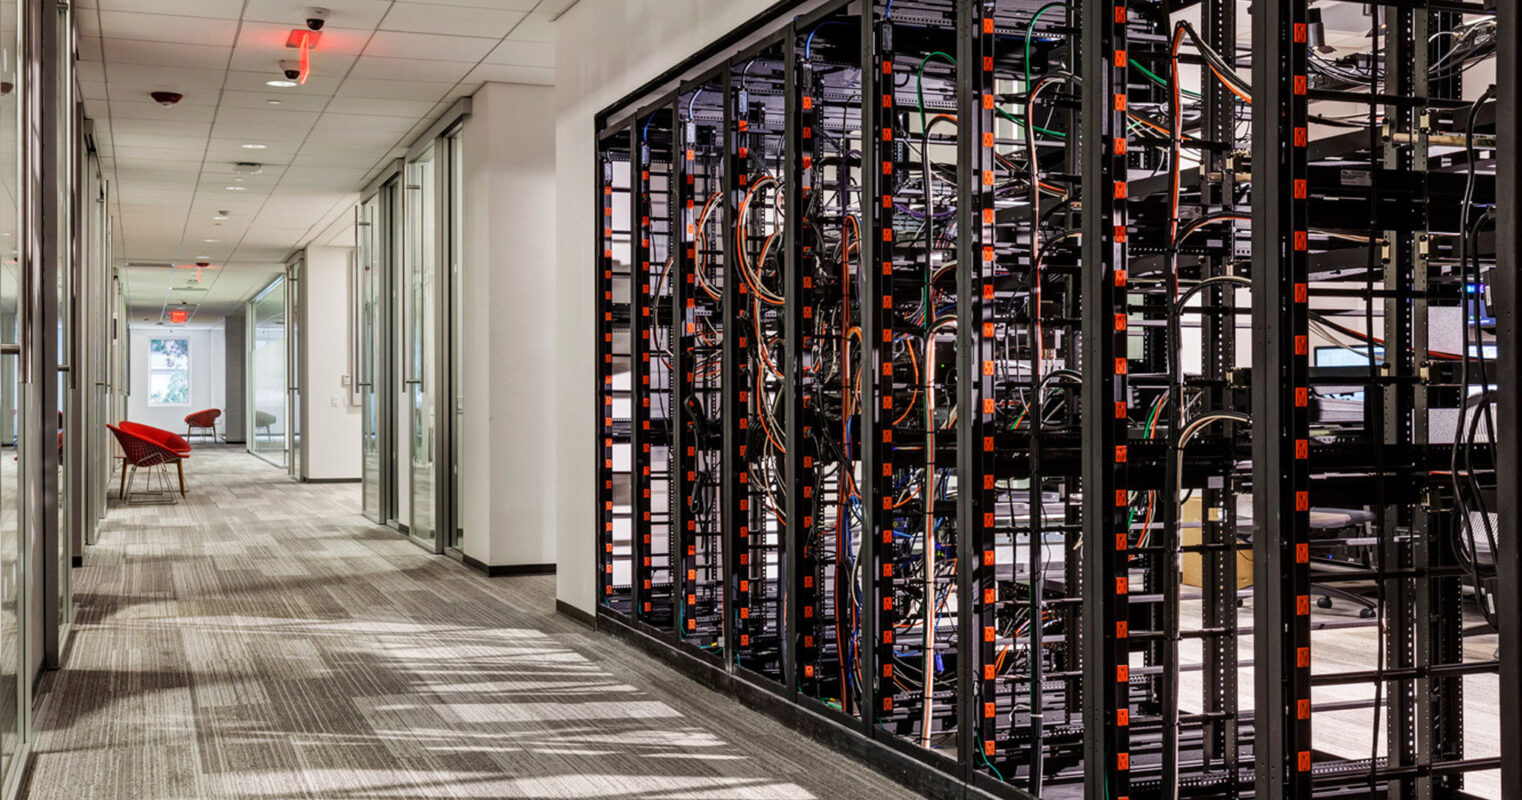 Sleek corporate hallway with a striking contrast between technology and design, featuring an open framework server rack on the right, patterned gray carpeting, and a pop of color from a red chair.